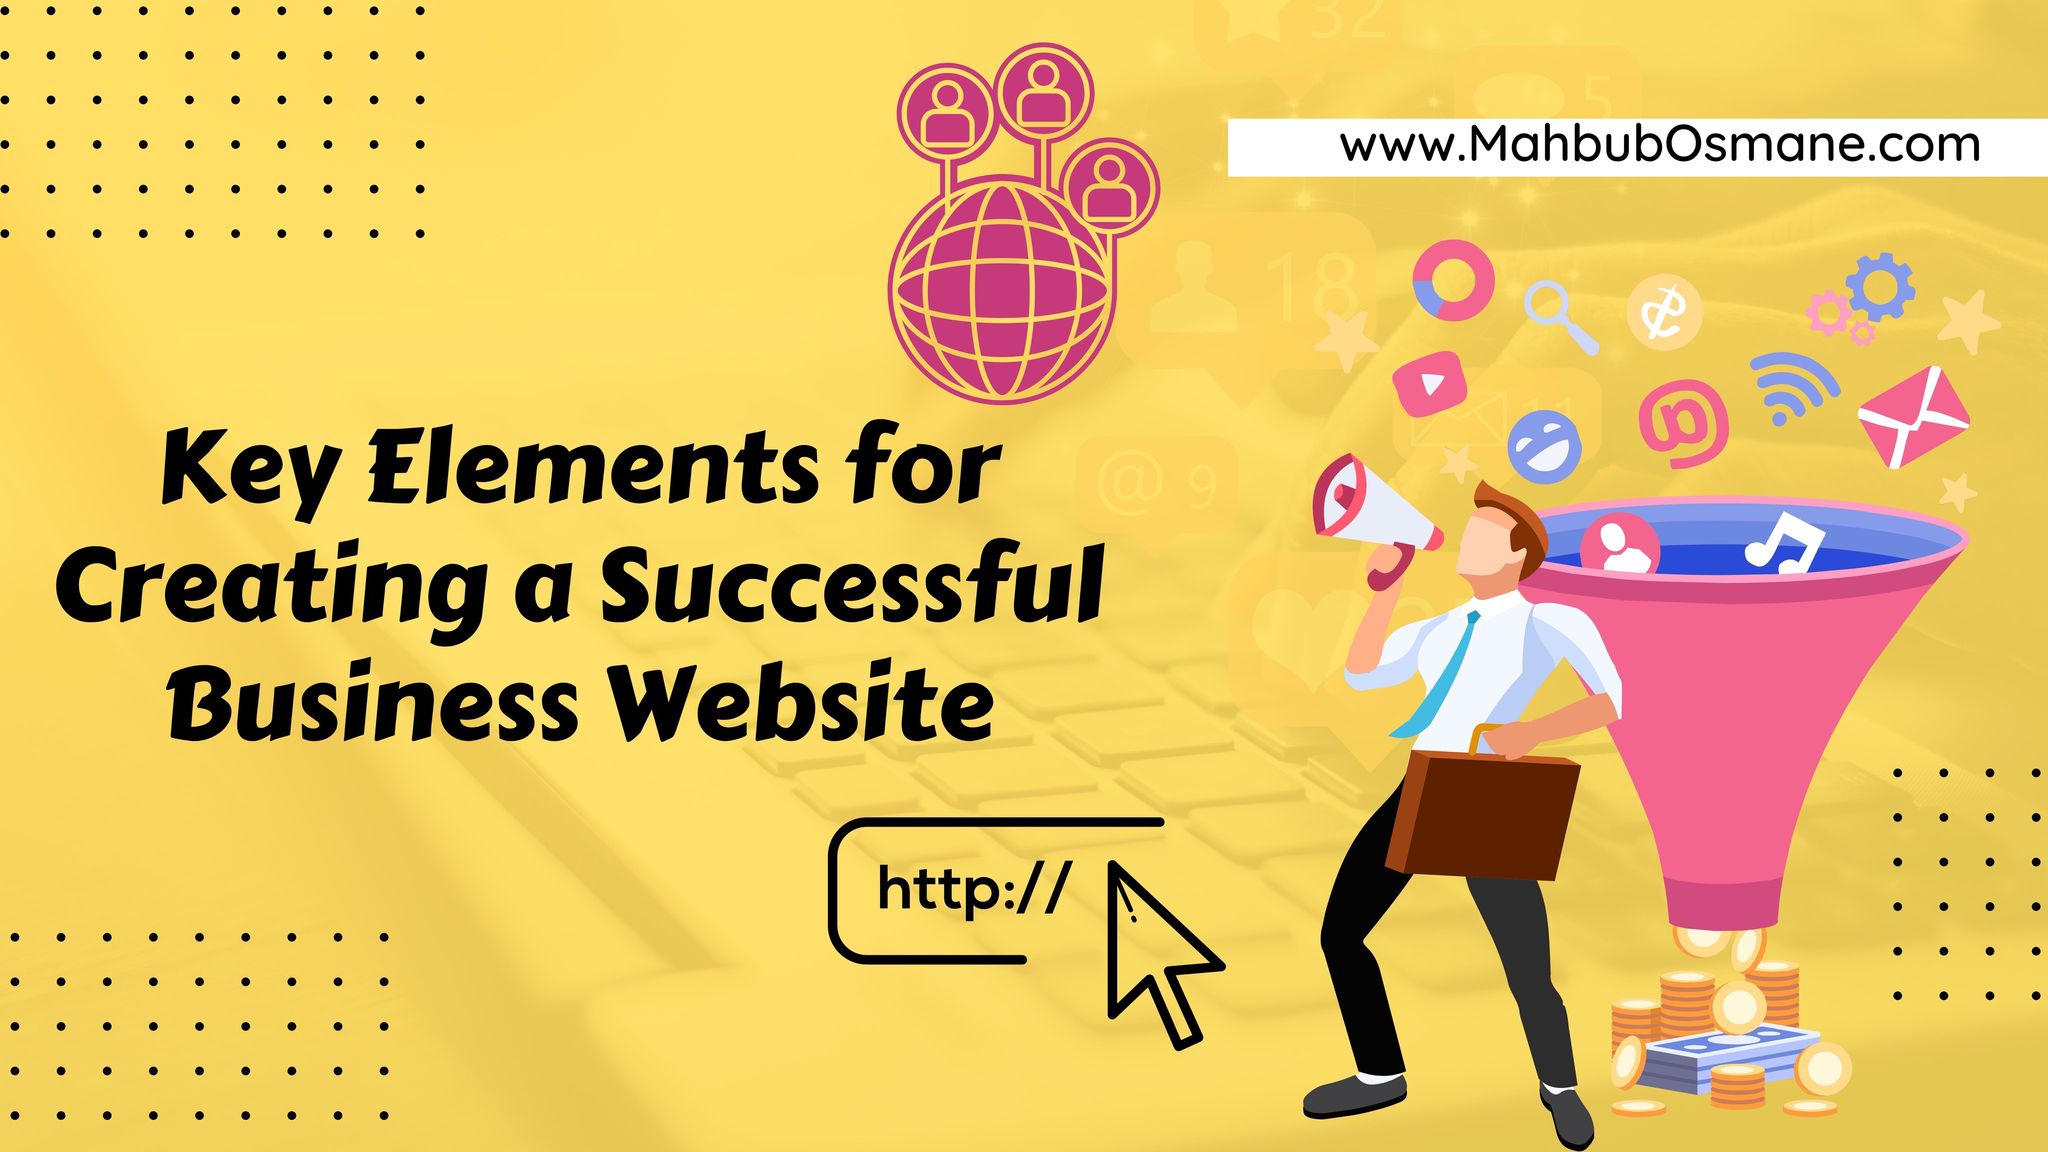 Key Elements for Creating a Successful Business Website